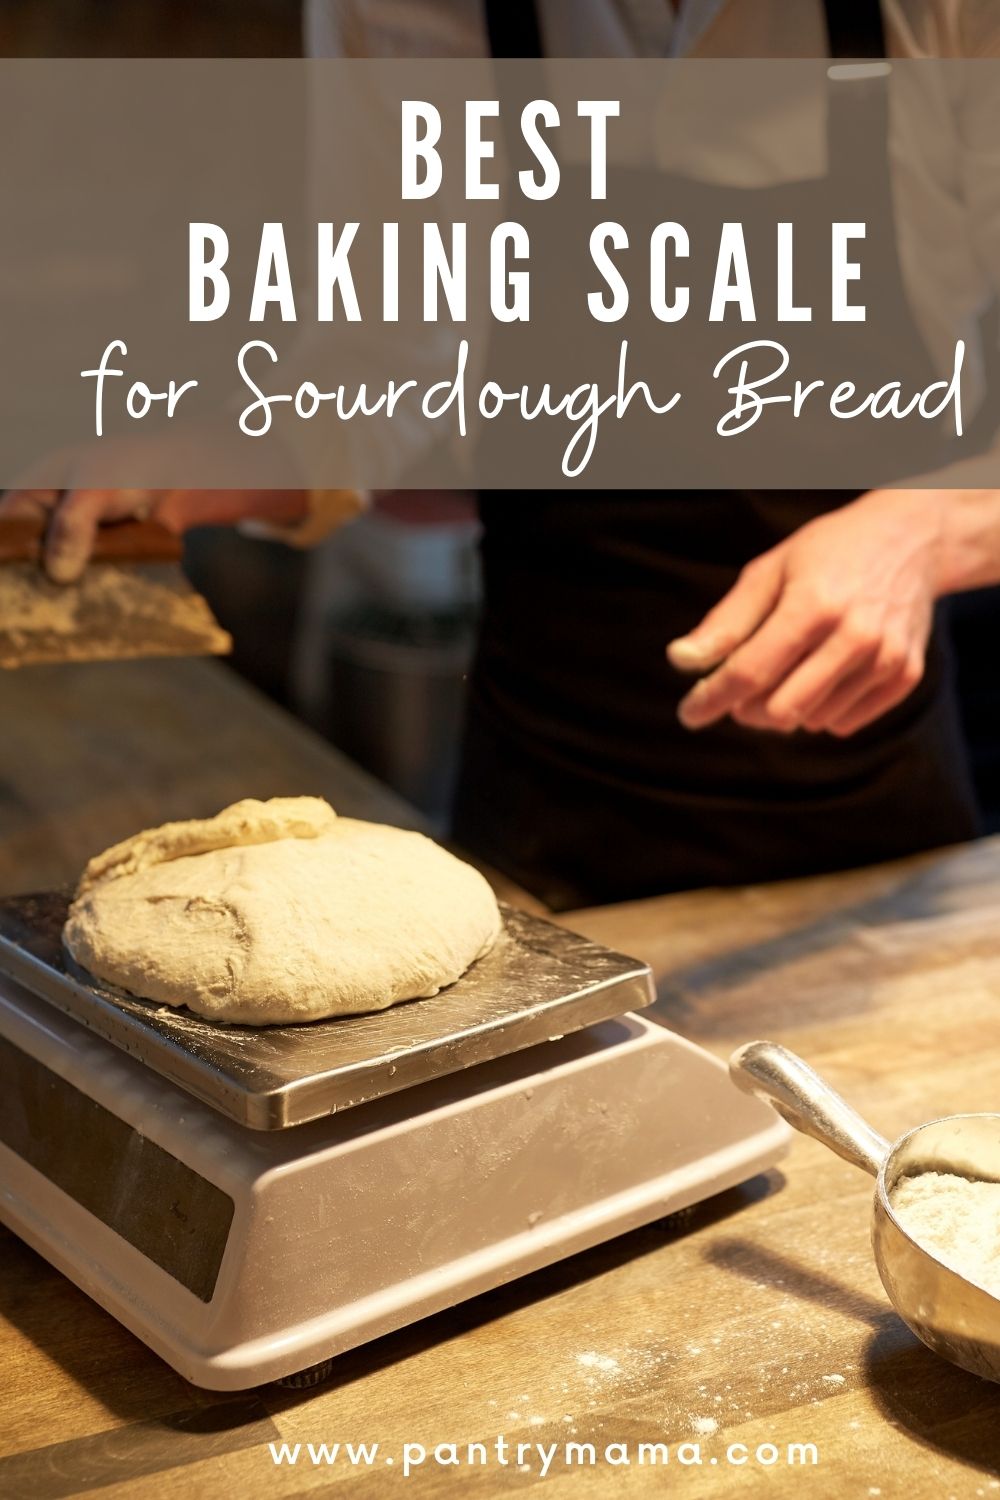 The Best Digital Kitchen Scale – The Bread Guide: The ultimate